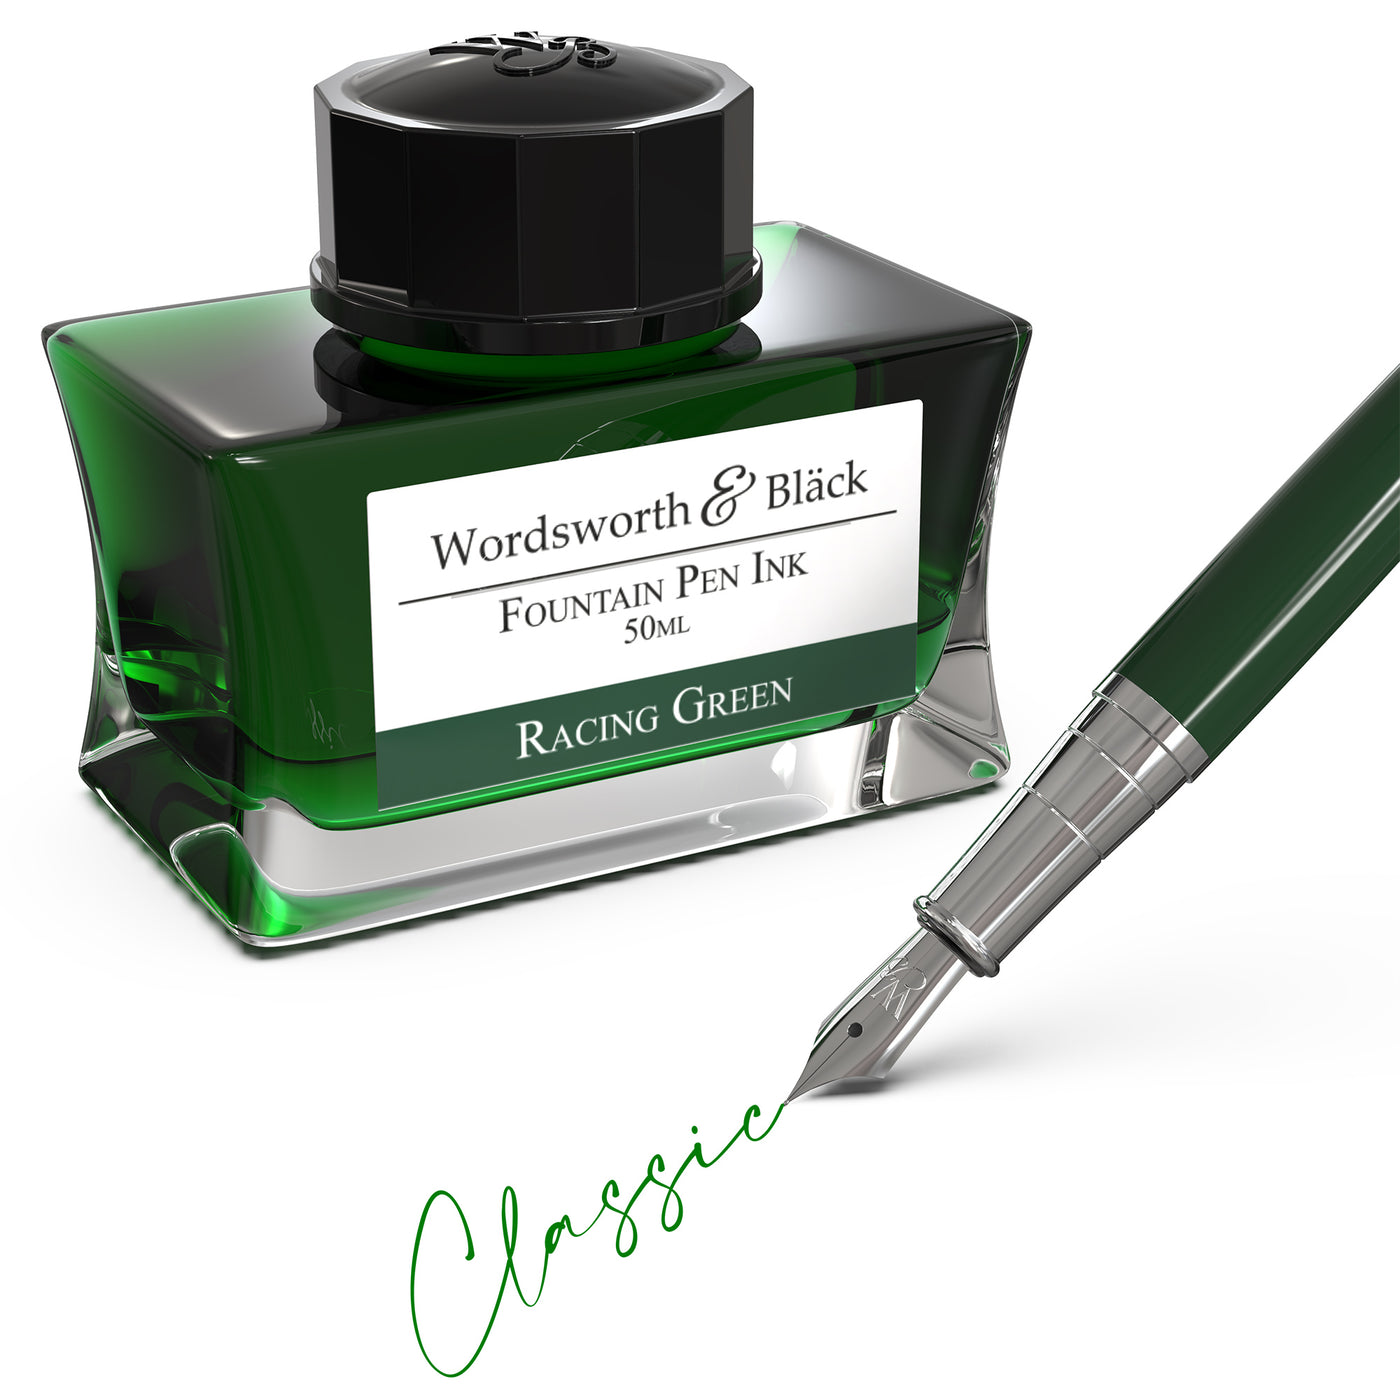 Wordsworth and Black Fountain Pen Ink Bottle, Premium Luxury Edition, Fountain Pens Bottled Ink; Classic Designed Bottle Smooth Flow